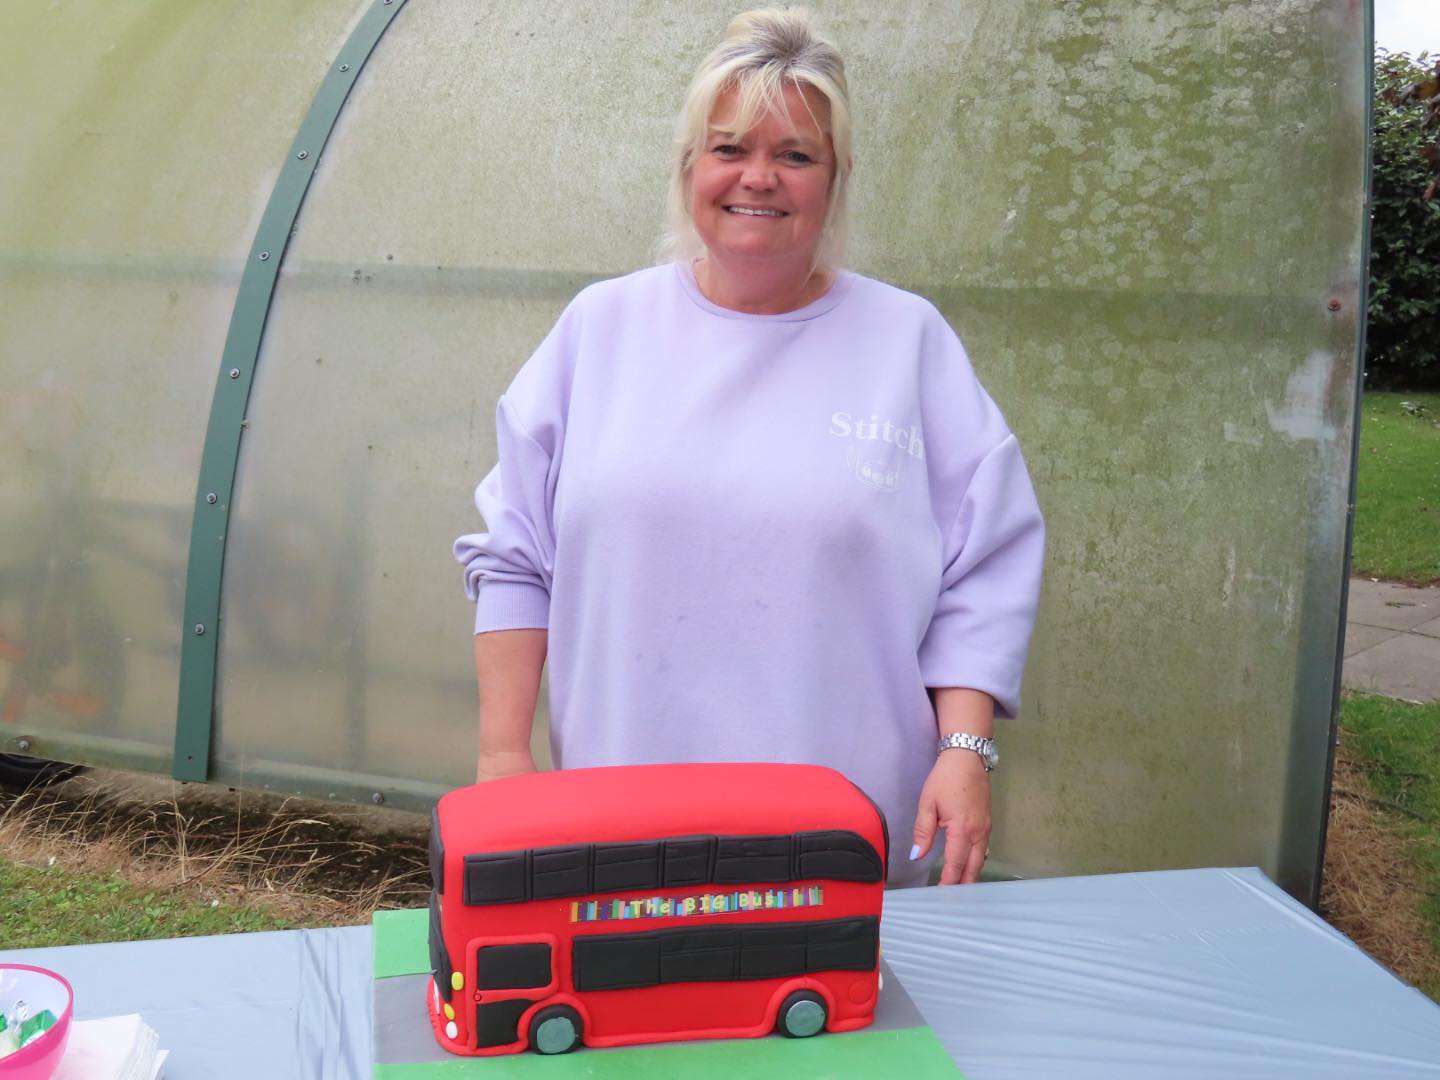 The Big Bus at Marshside Primary School in Southport. The Big Bus cake was specially made by Big Bus cake made by Big Bus Committee member Julie Berry. Photo by Andrew Brown Media